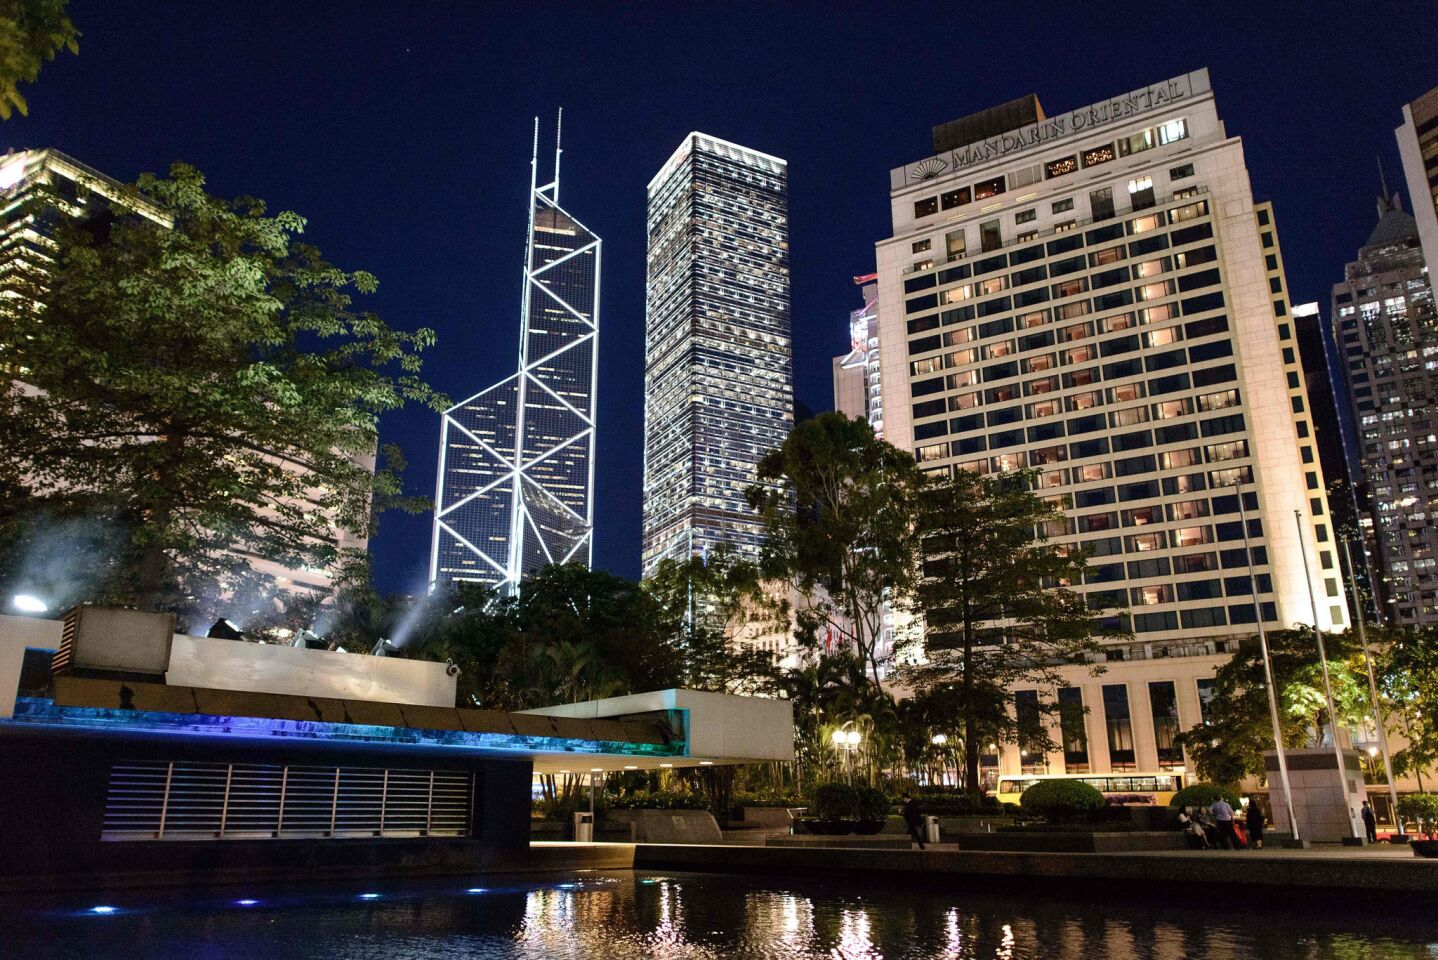 The Bank of China tower in Hong Kong, designed by architect I.M. Pei.